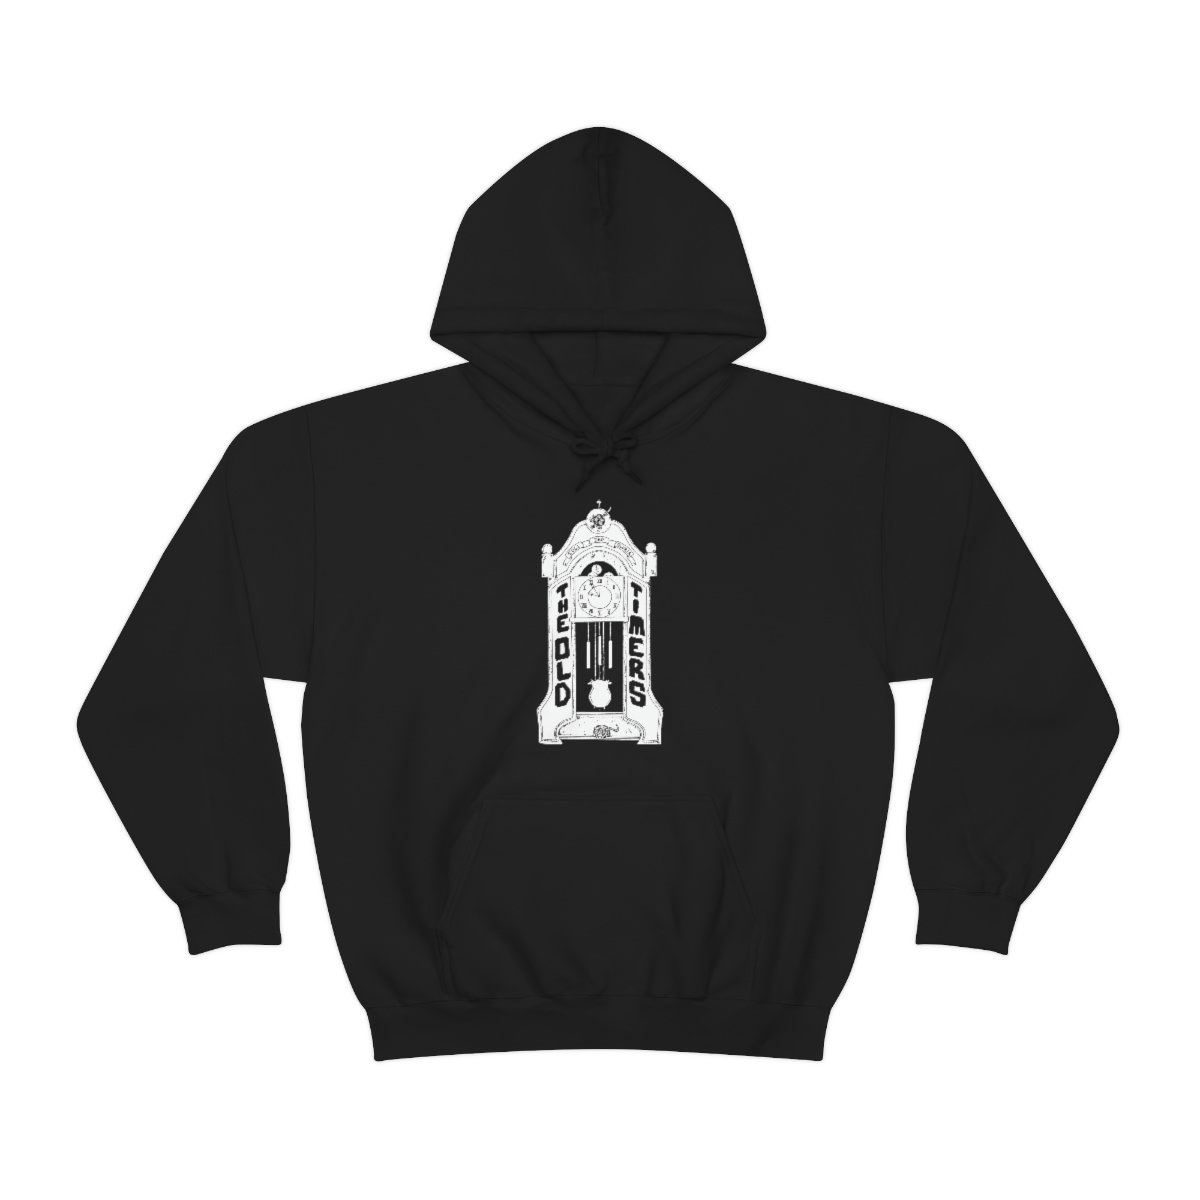 The Old Timers (TPR) Pullover Hooded Sweatshirt